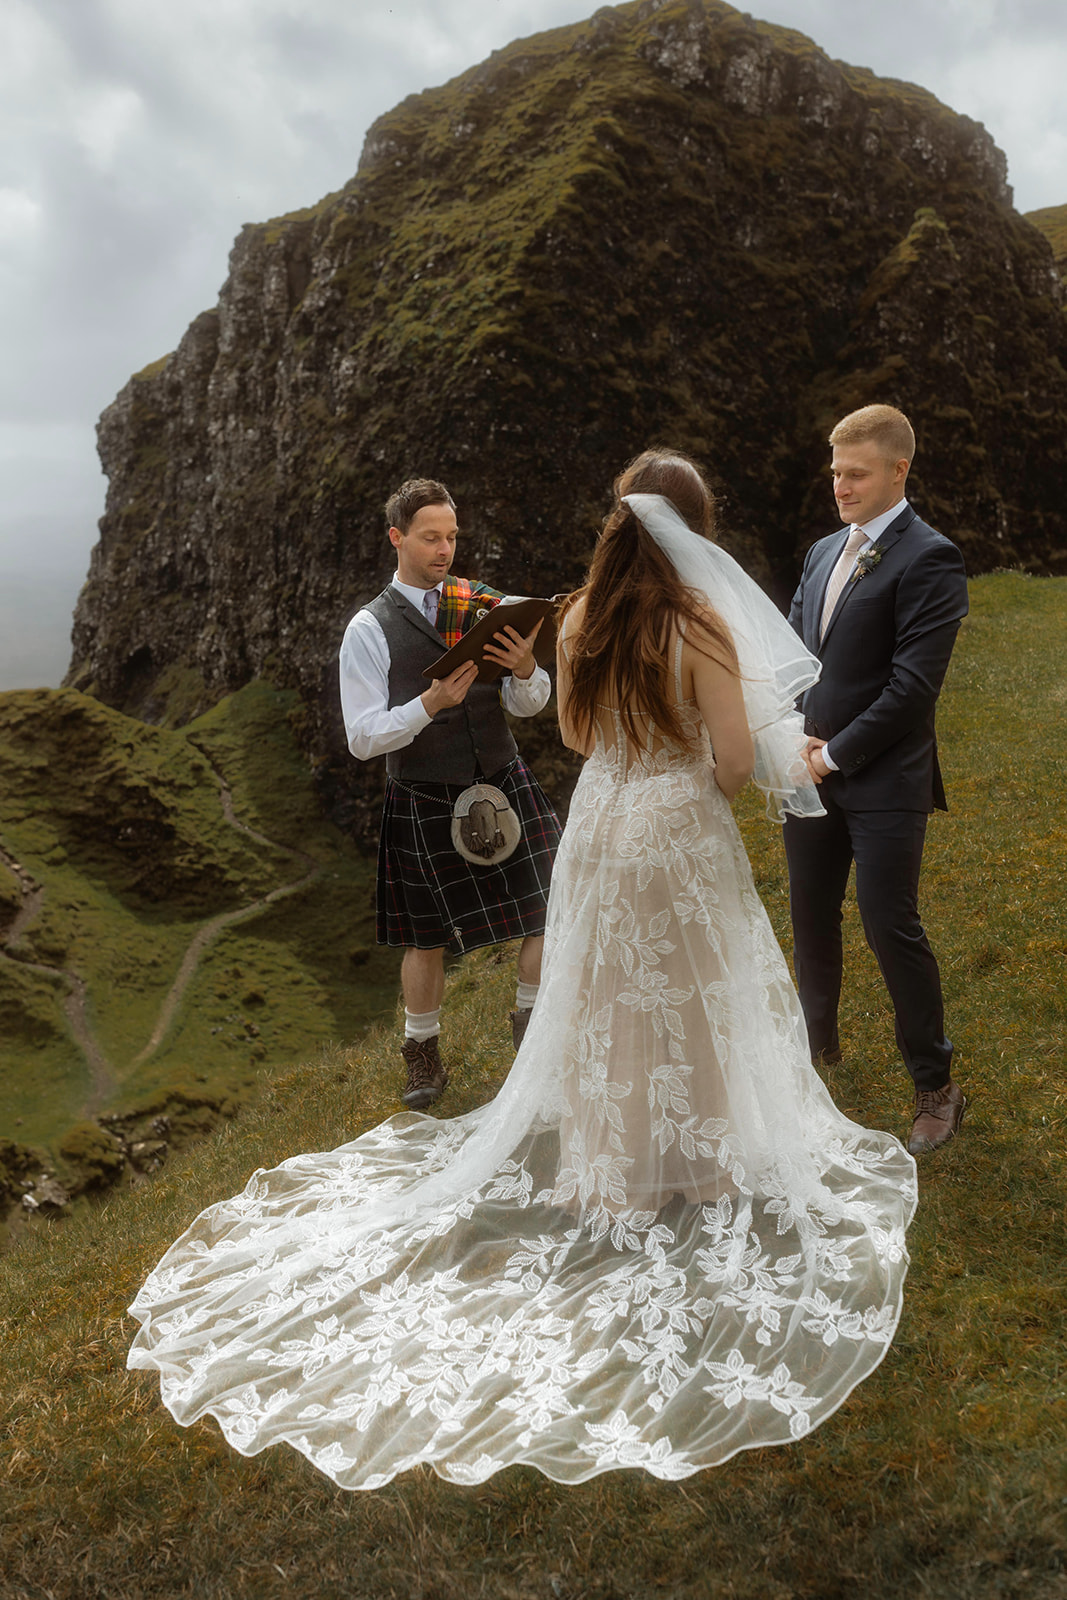 Step into a world of wonder as Emma and Matthew exchange vows at their enchanted elopement ceremony in the Quiraing, Isl